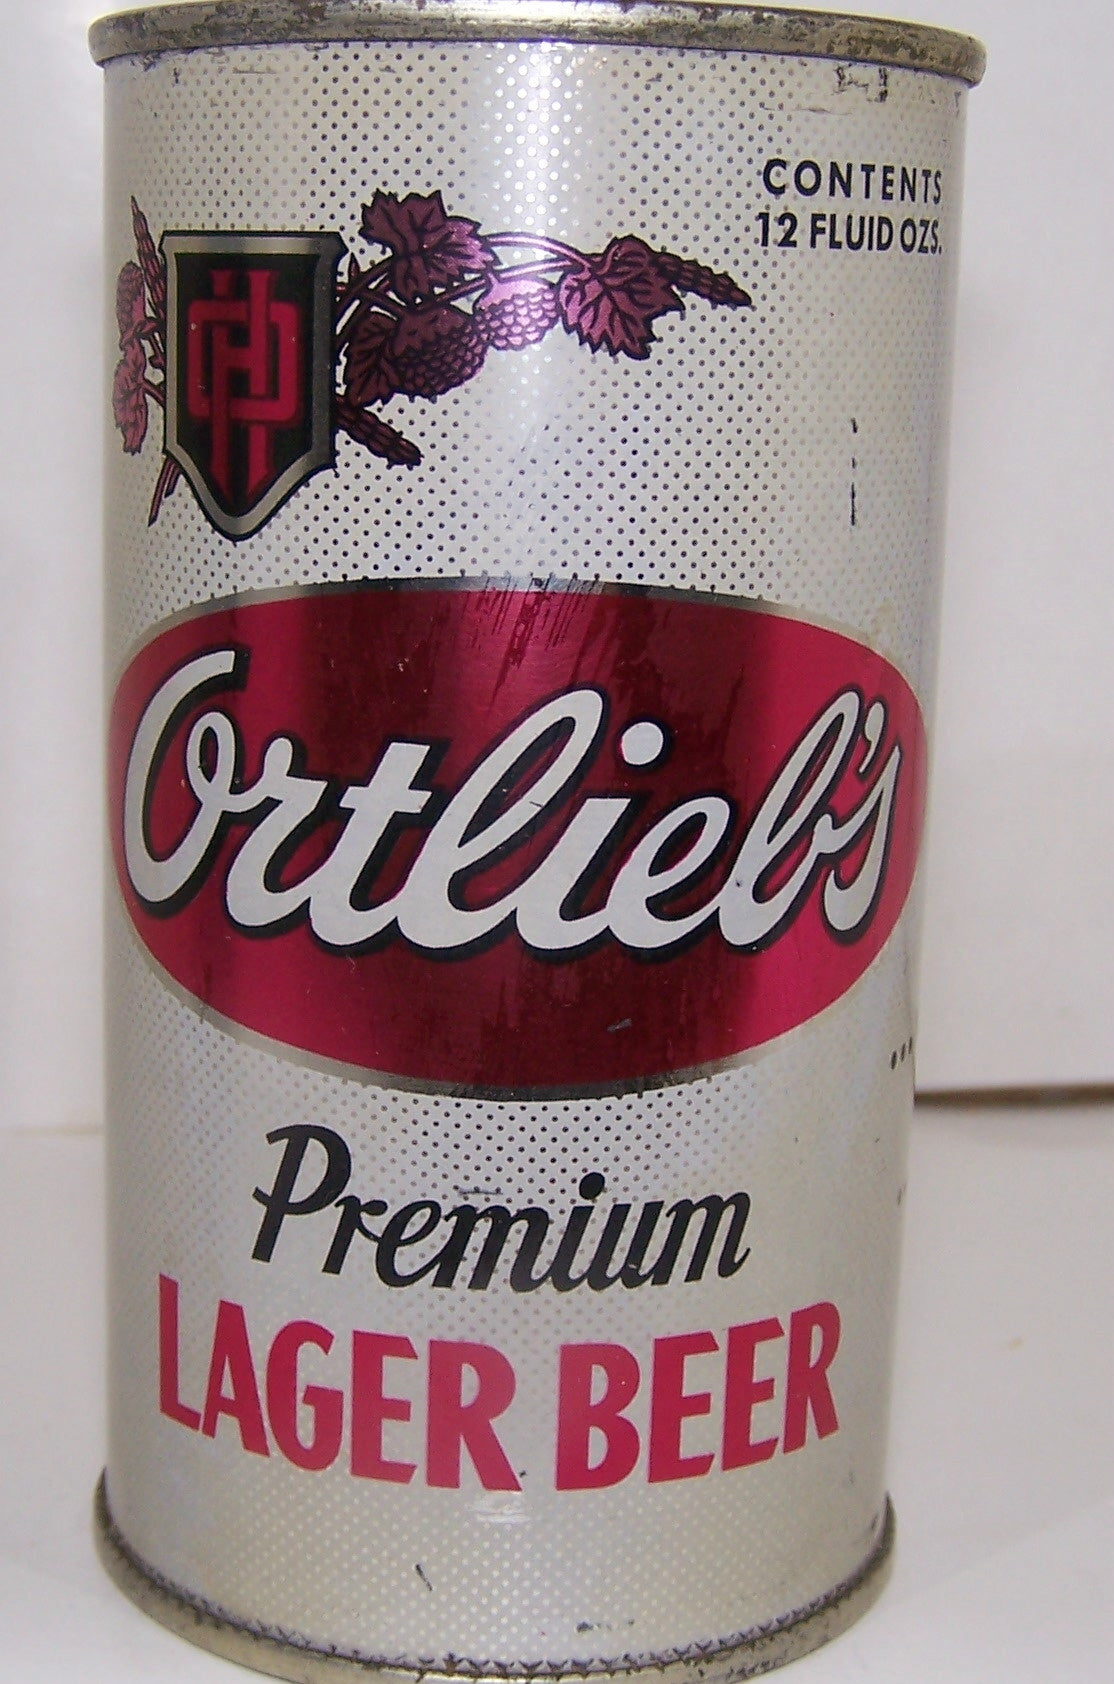 Ortlieb's Premium Lager Beer, (Pink Hops) USBC 109-21, Grade 1- Sold on 09/16/16